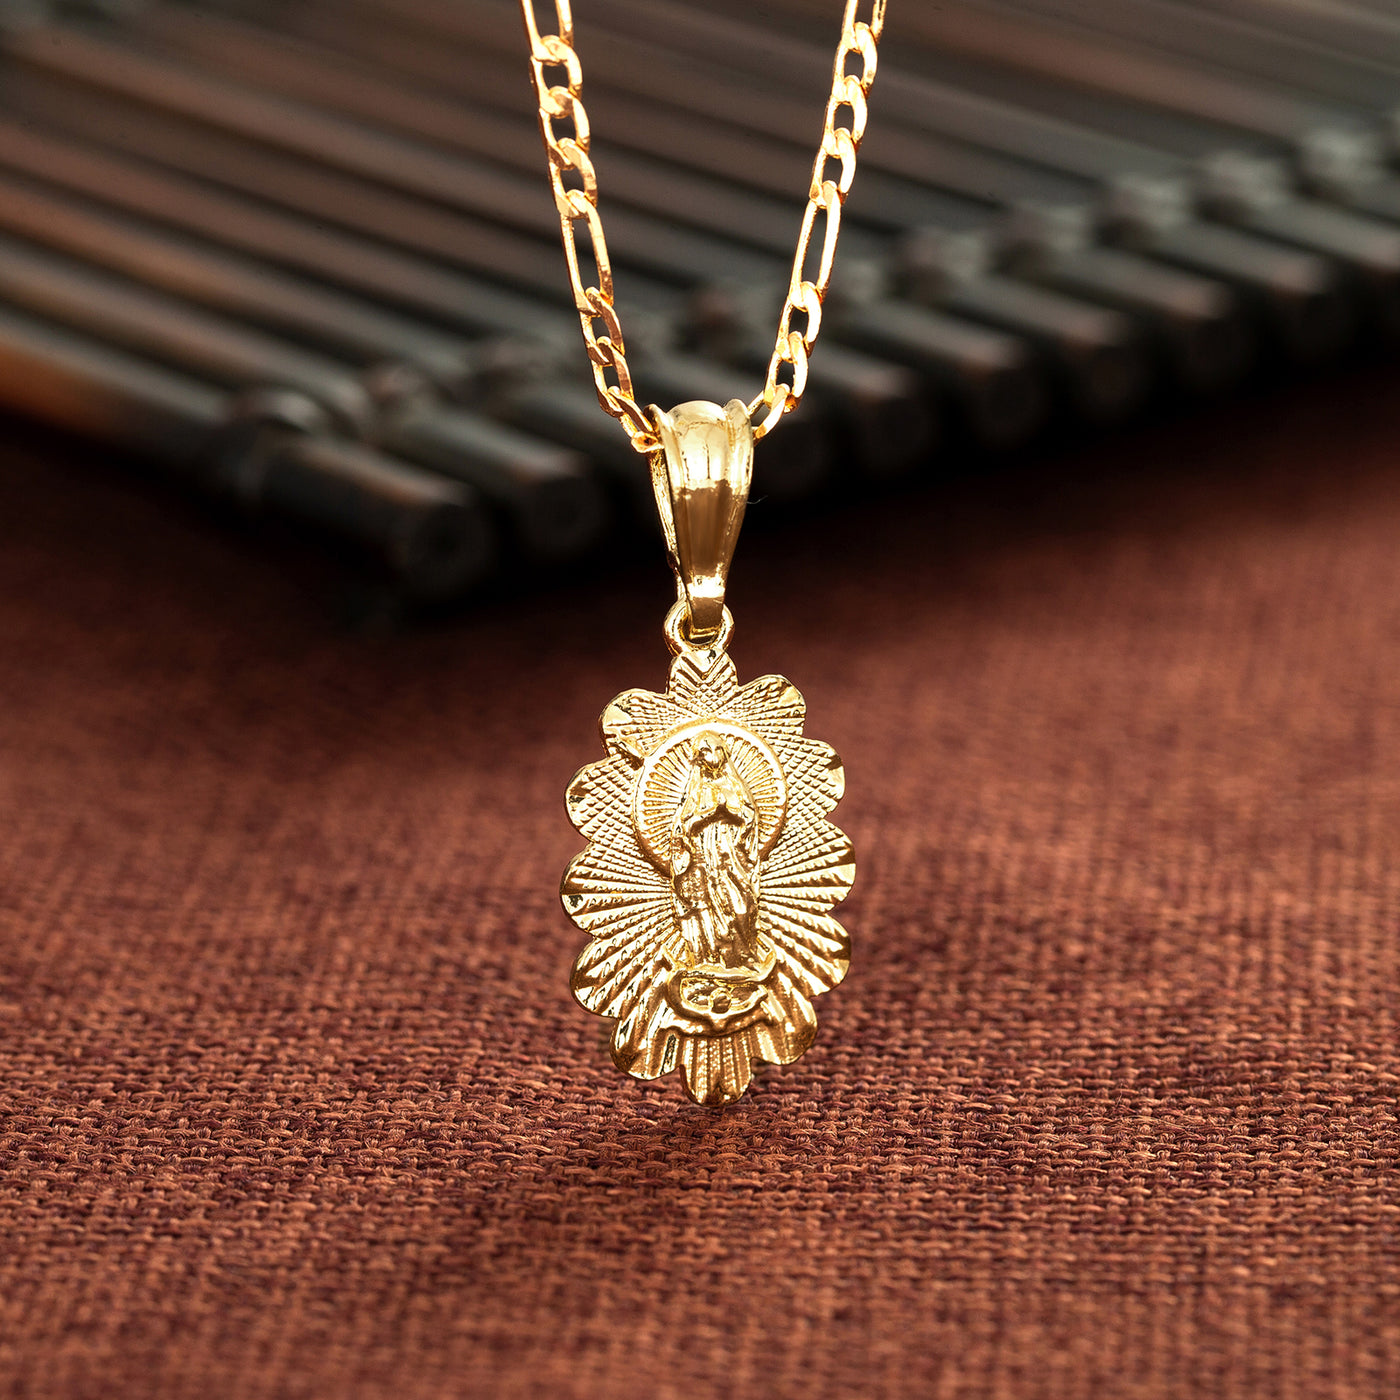 Virgen Mary Mini Necklace 14K Gold Filled - Luxe & Co. Jewelry